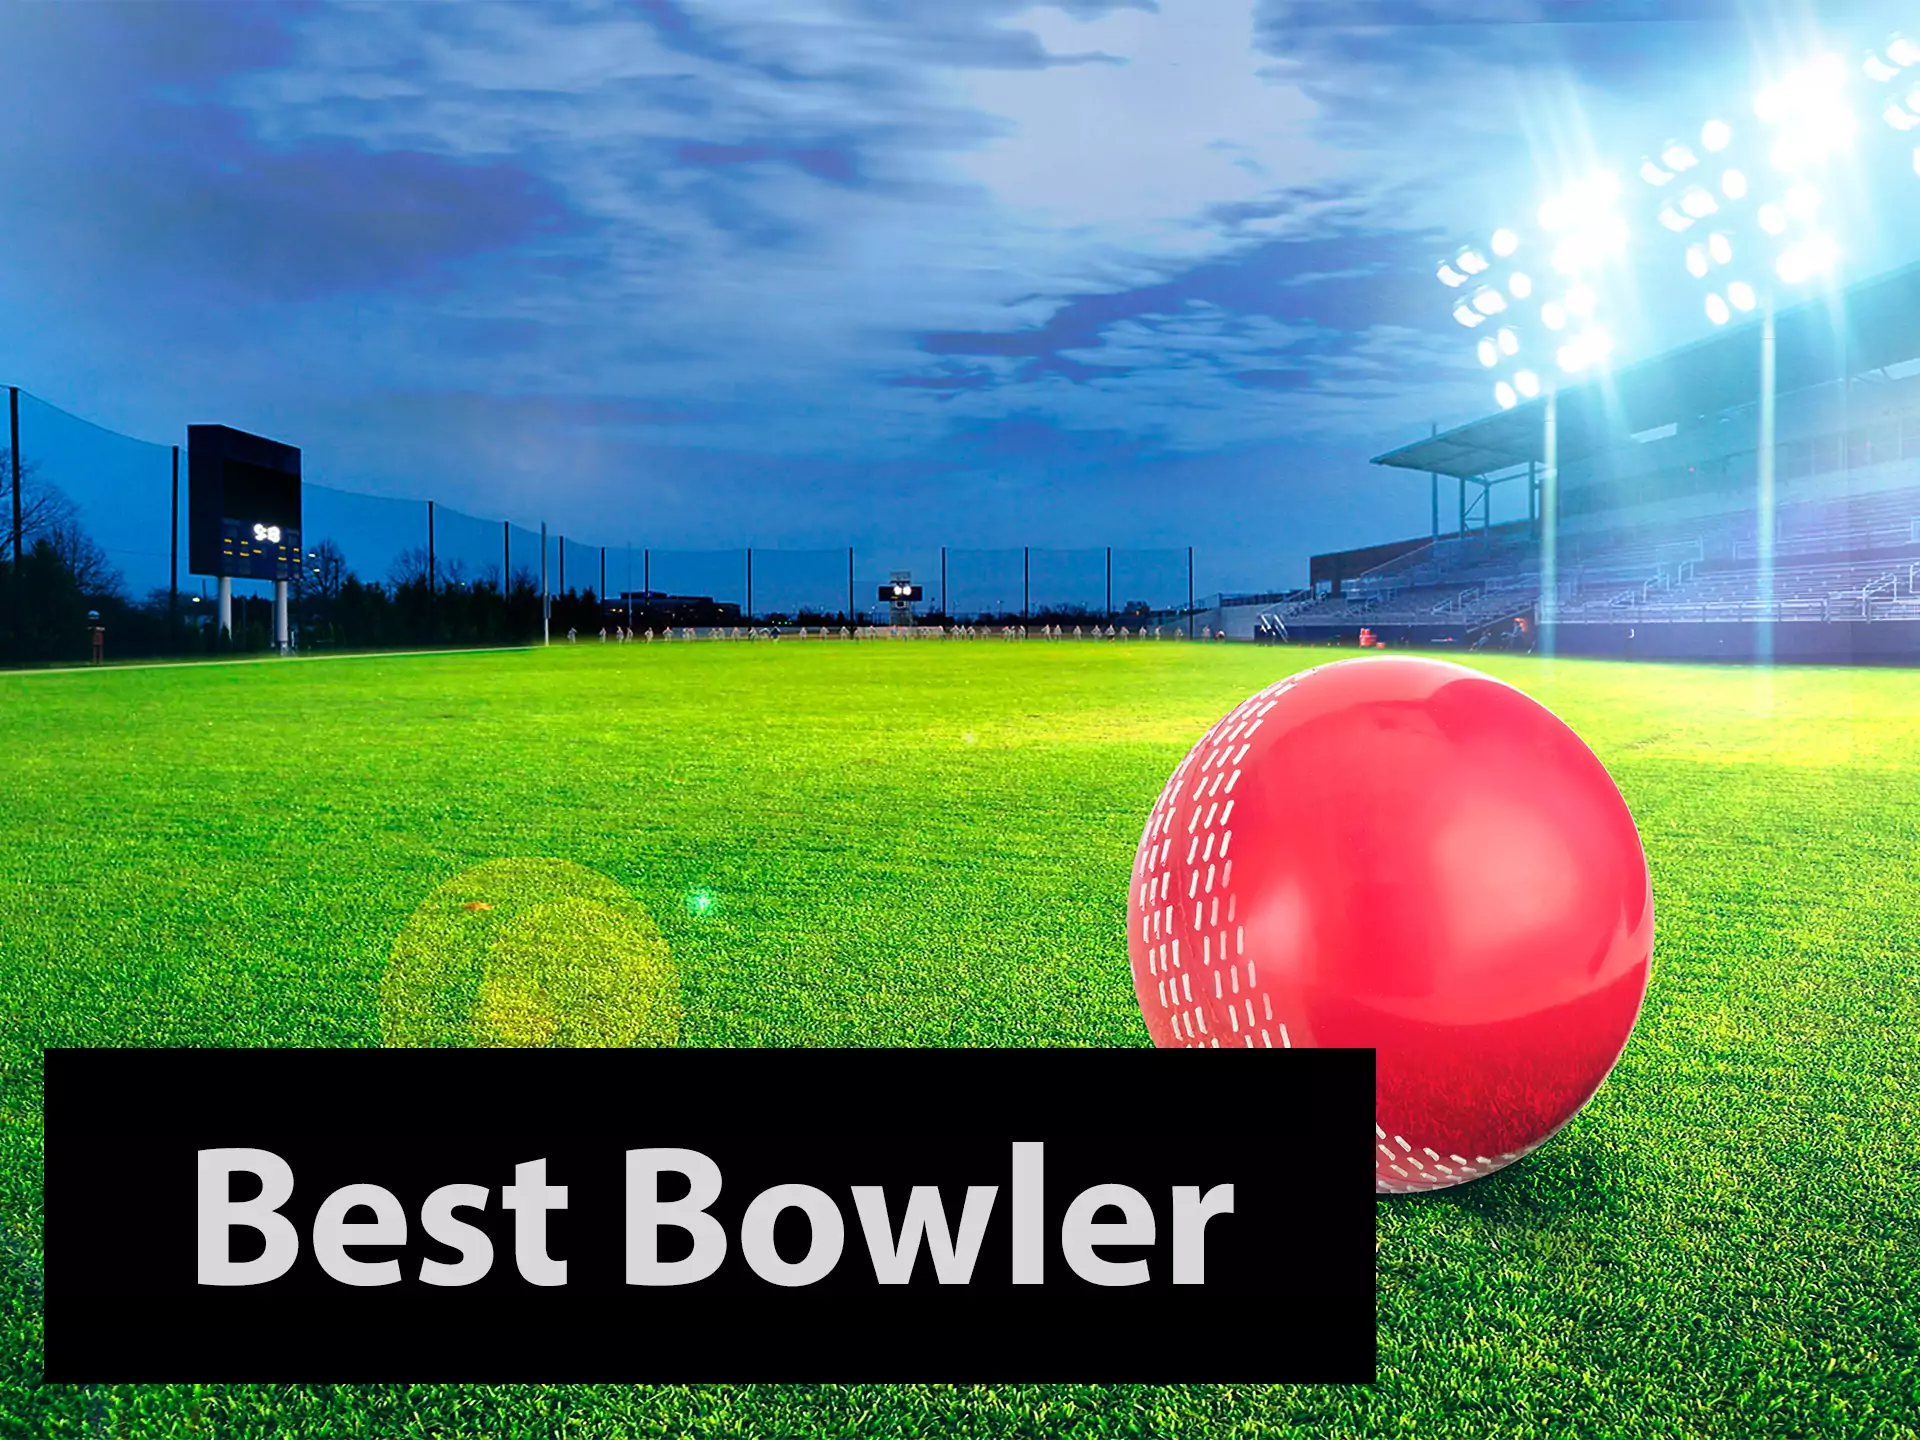 The best bowler market is also available for betting.